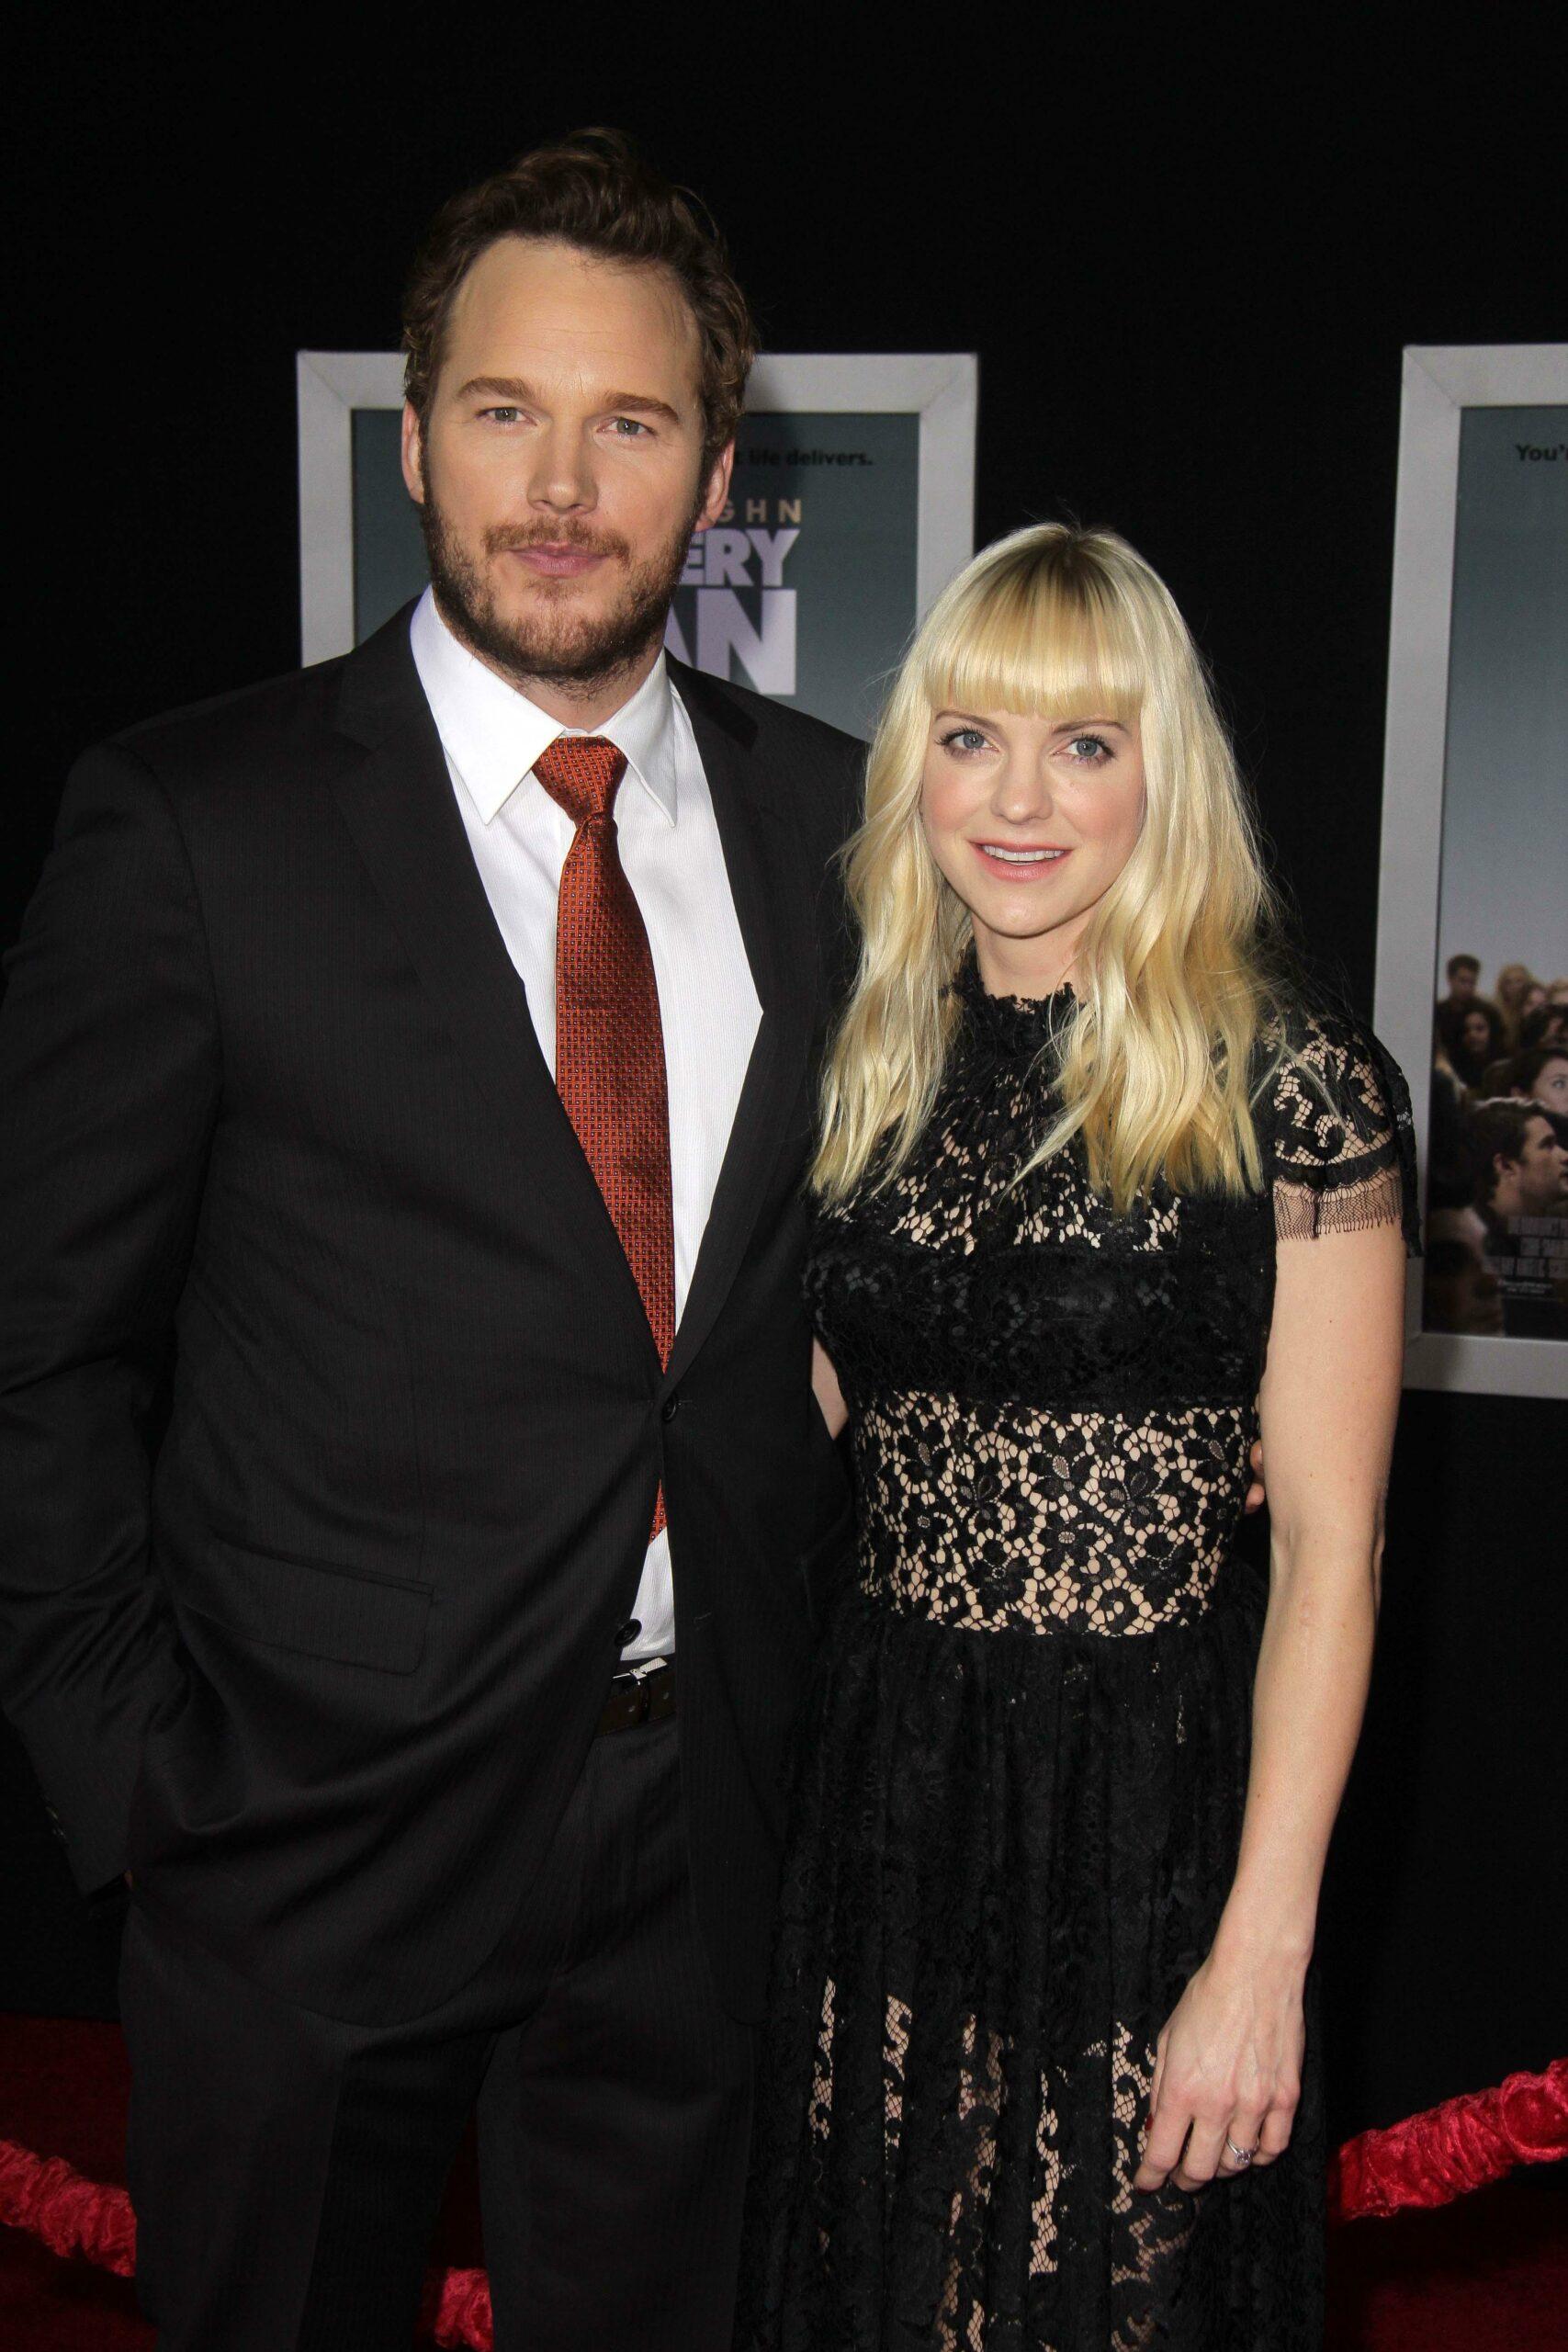 Chris Pratt and ex-wife Anna Faris at "Delivery Man" premiere